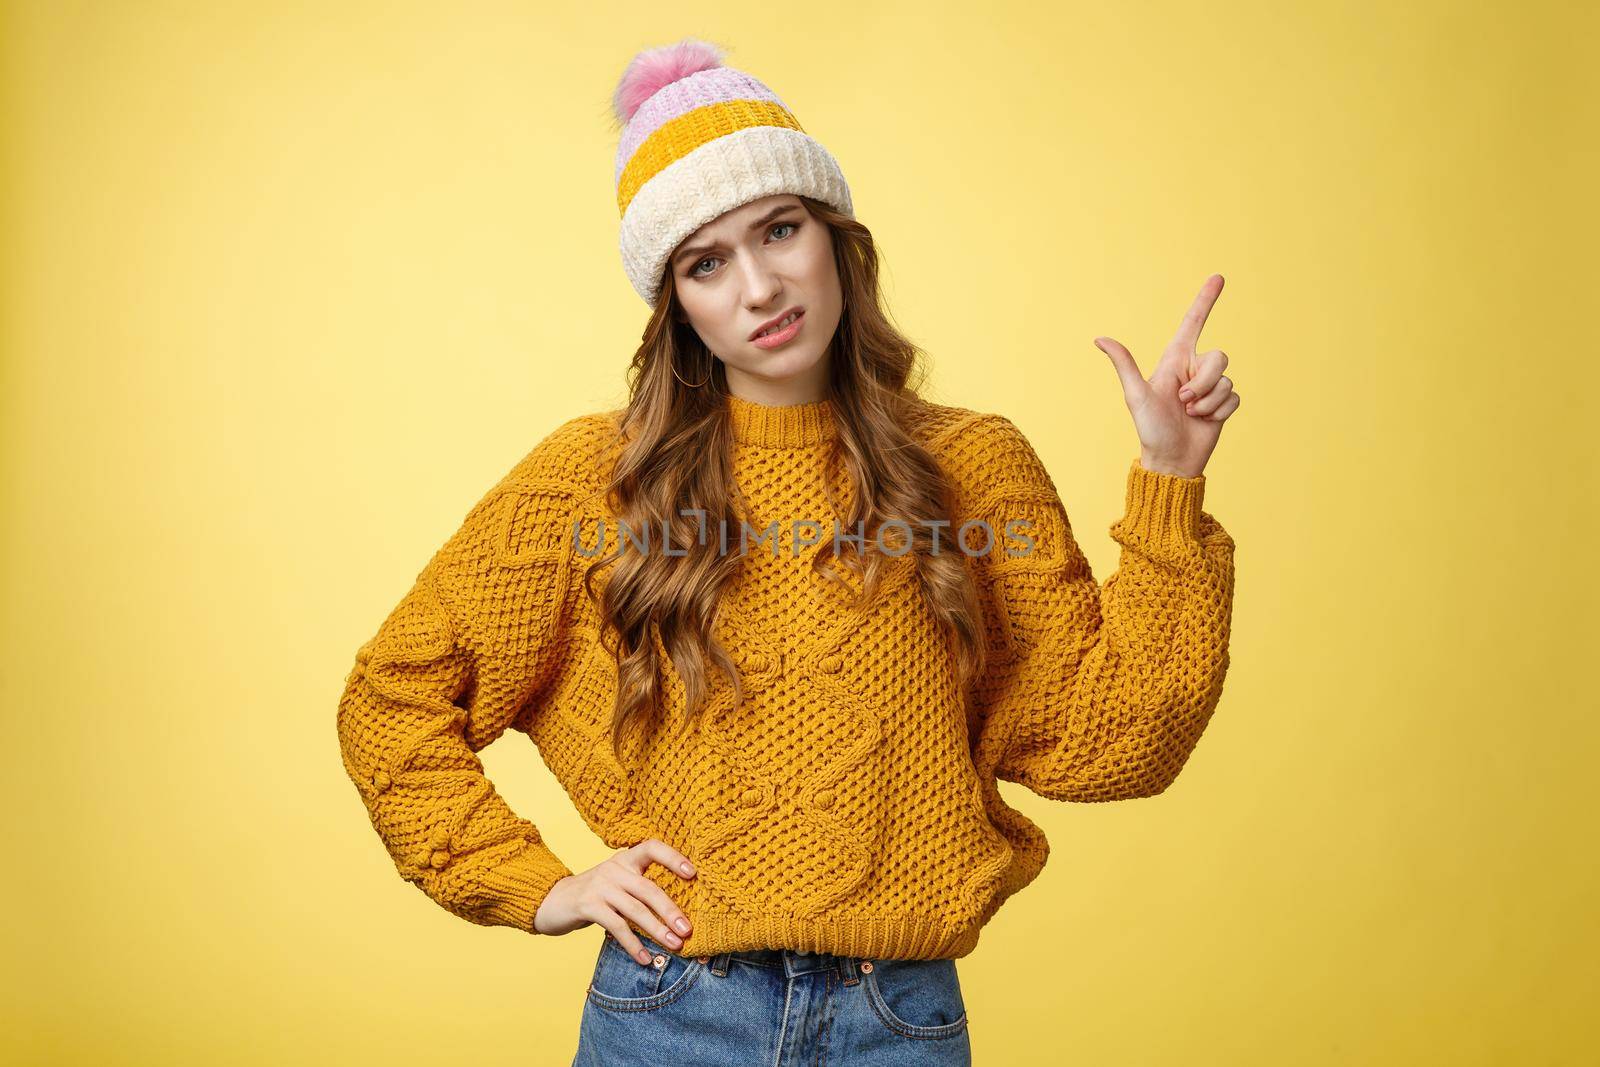 You call it advertisement, bad. Unimpressed displeased snobbish demanding female displeased hotel service pointing upper right corner cringing bothered frowning complaining yellow background.